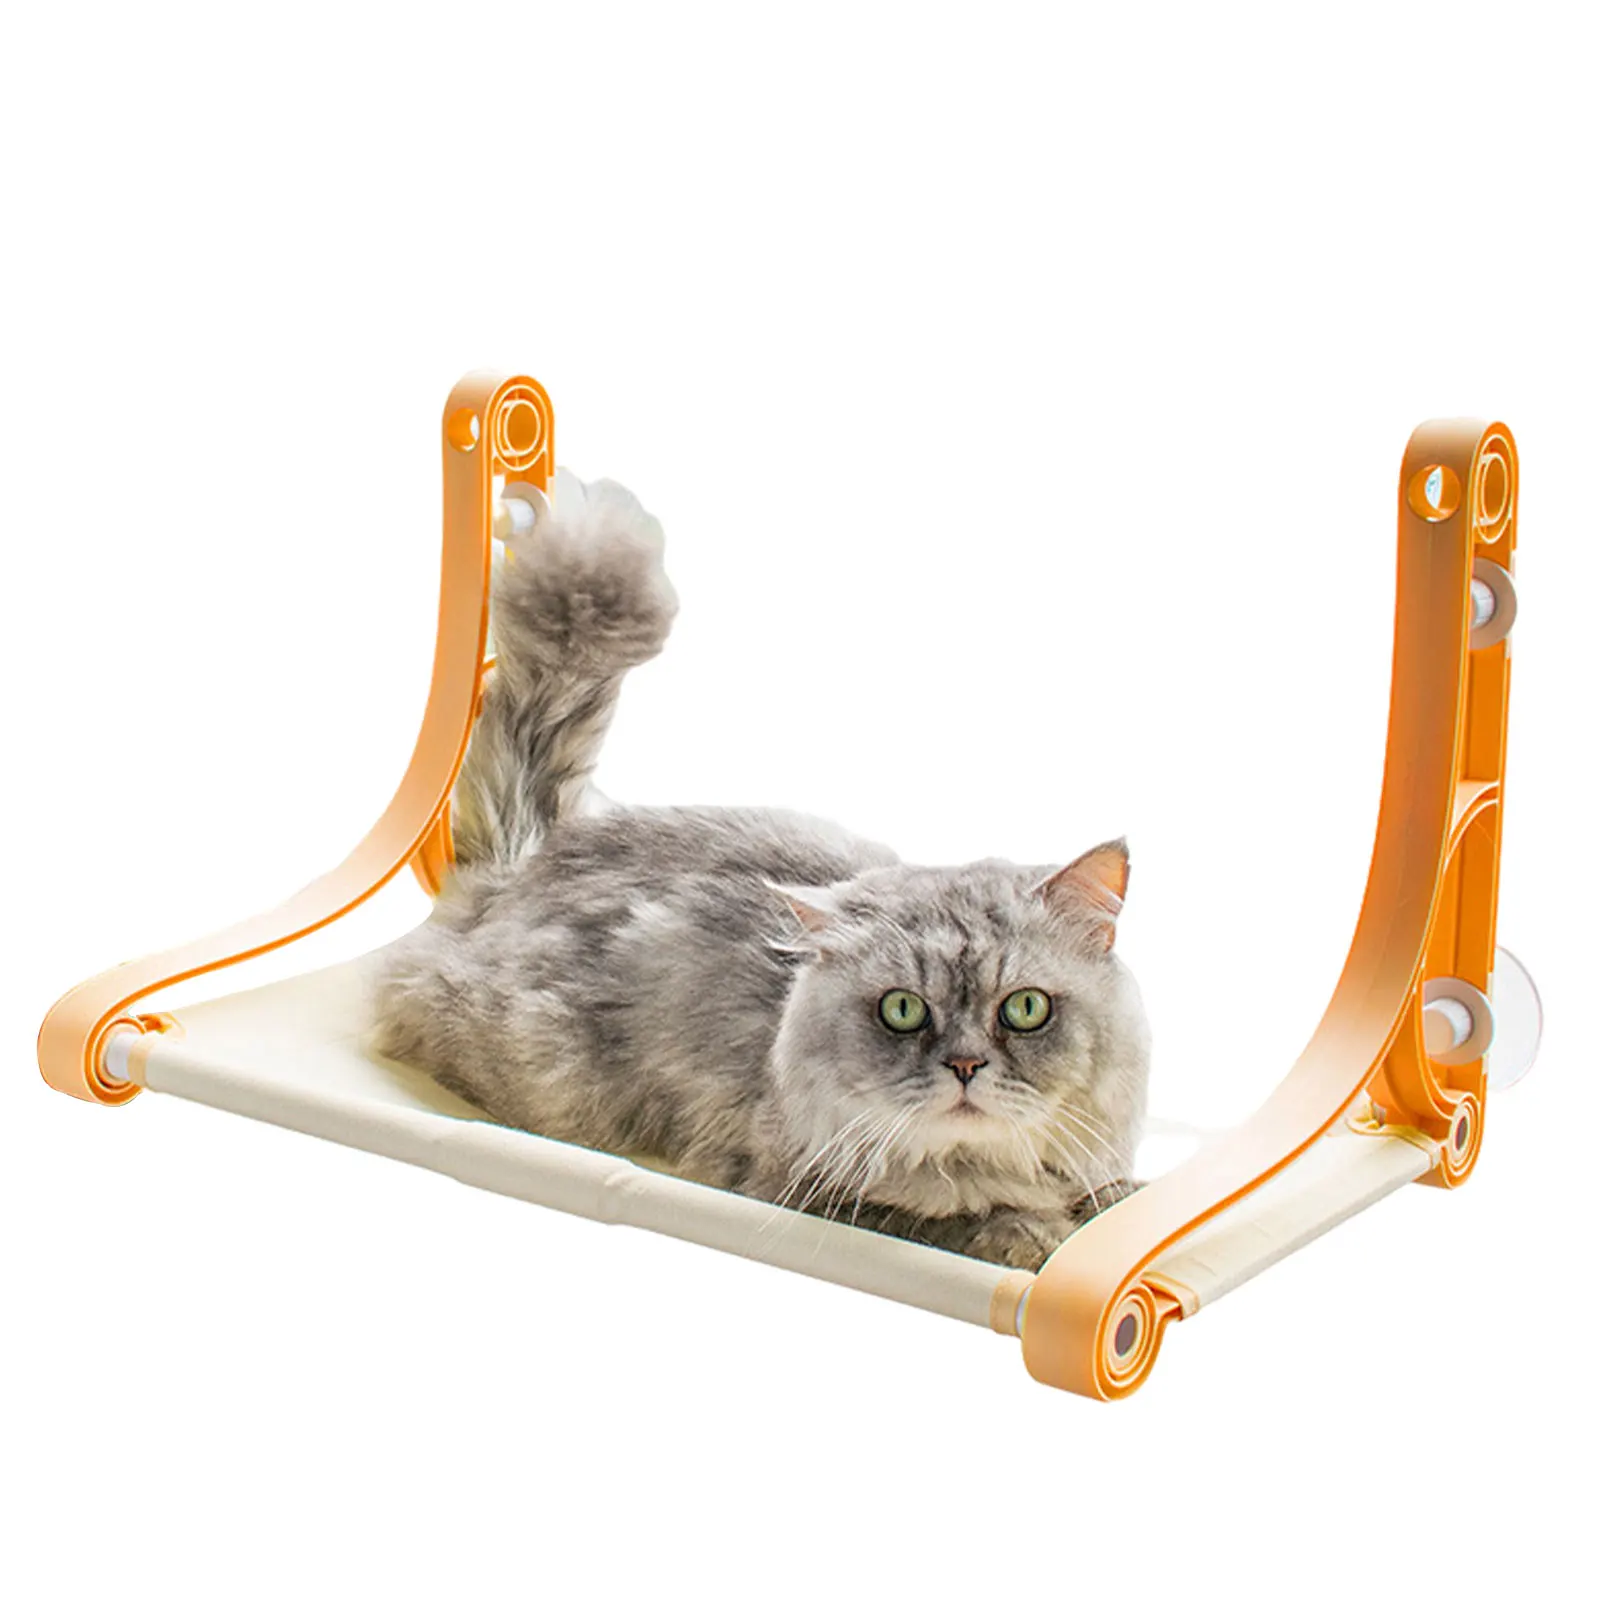 

Cat Hammock Window Perche Cat Hammocks For Indoor Cats Cat Hammock For Window Up To 50lb 2022 Latest Screw Suction Cups Extra